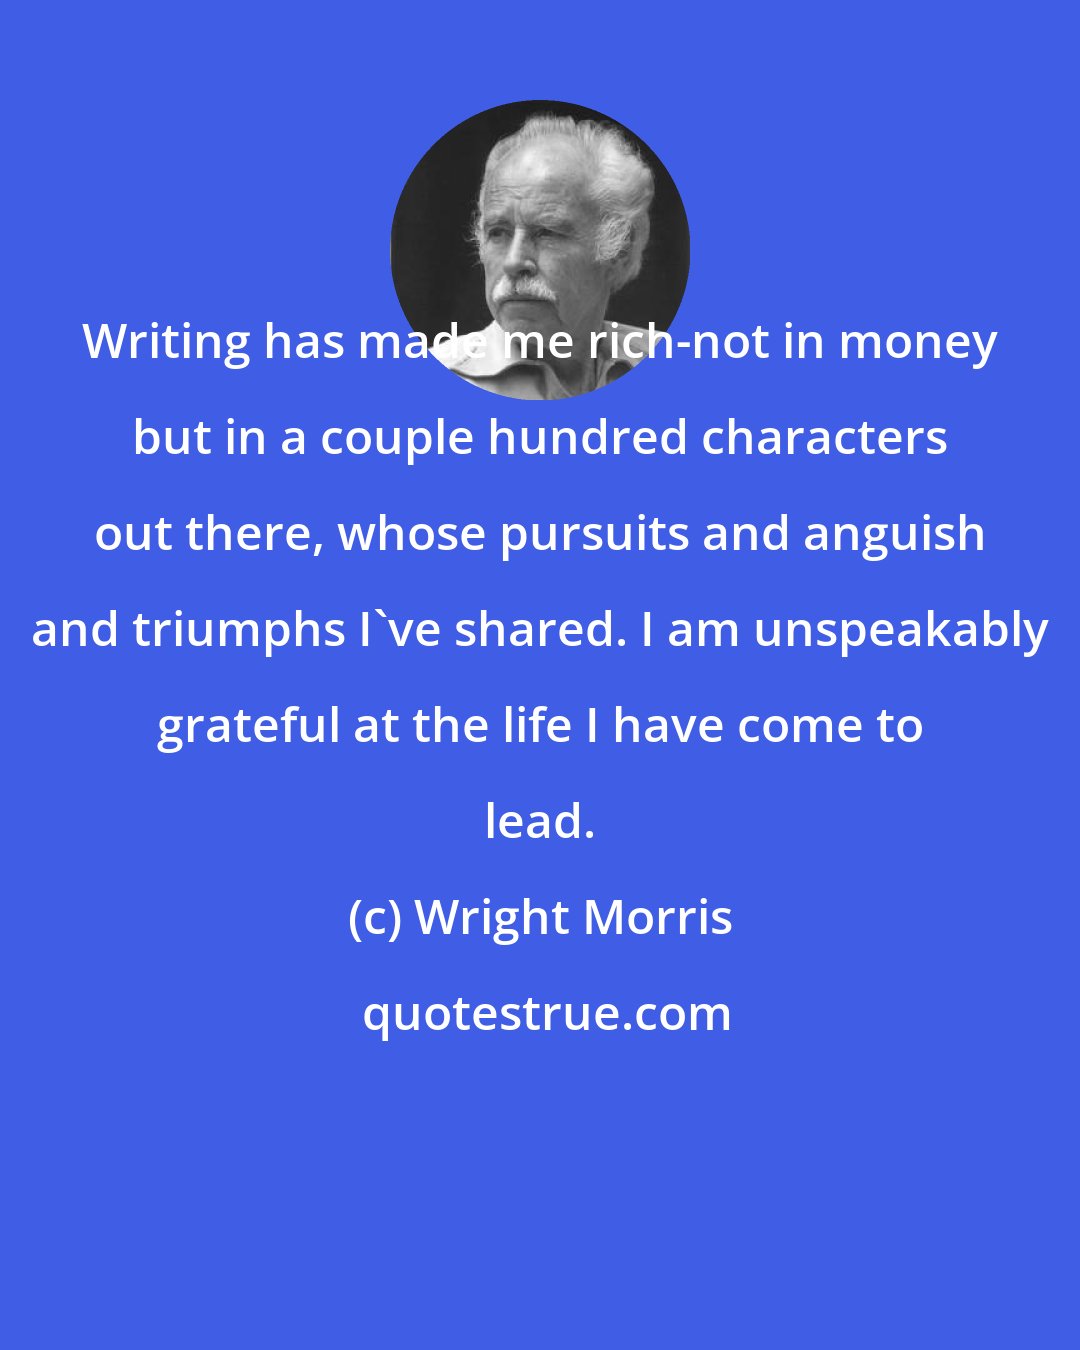 Wright Morris: Writing has made me rich-not in money but in a couple hundred characters out there, whose pursuits and anguish and triumphs I've shared. I am unspeakably grateful at the life I have come to lead.